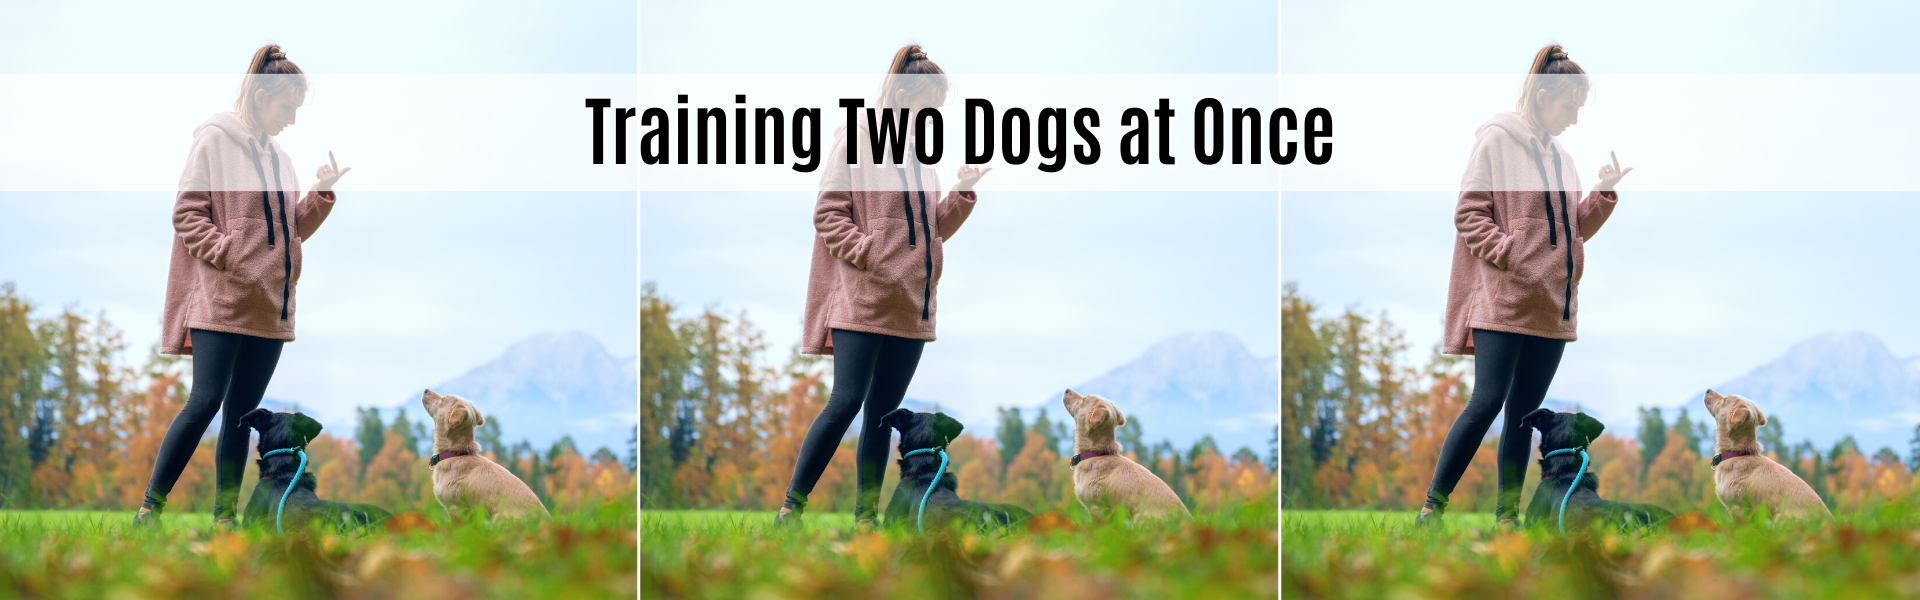 training two dogs at once